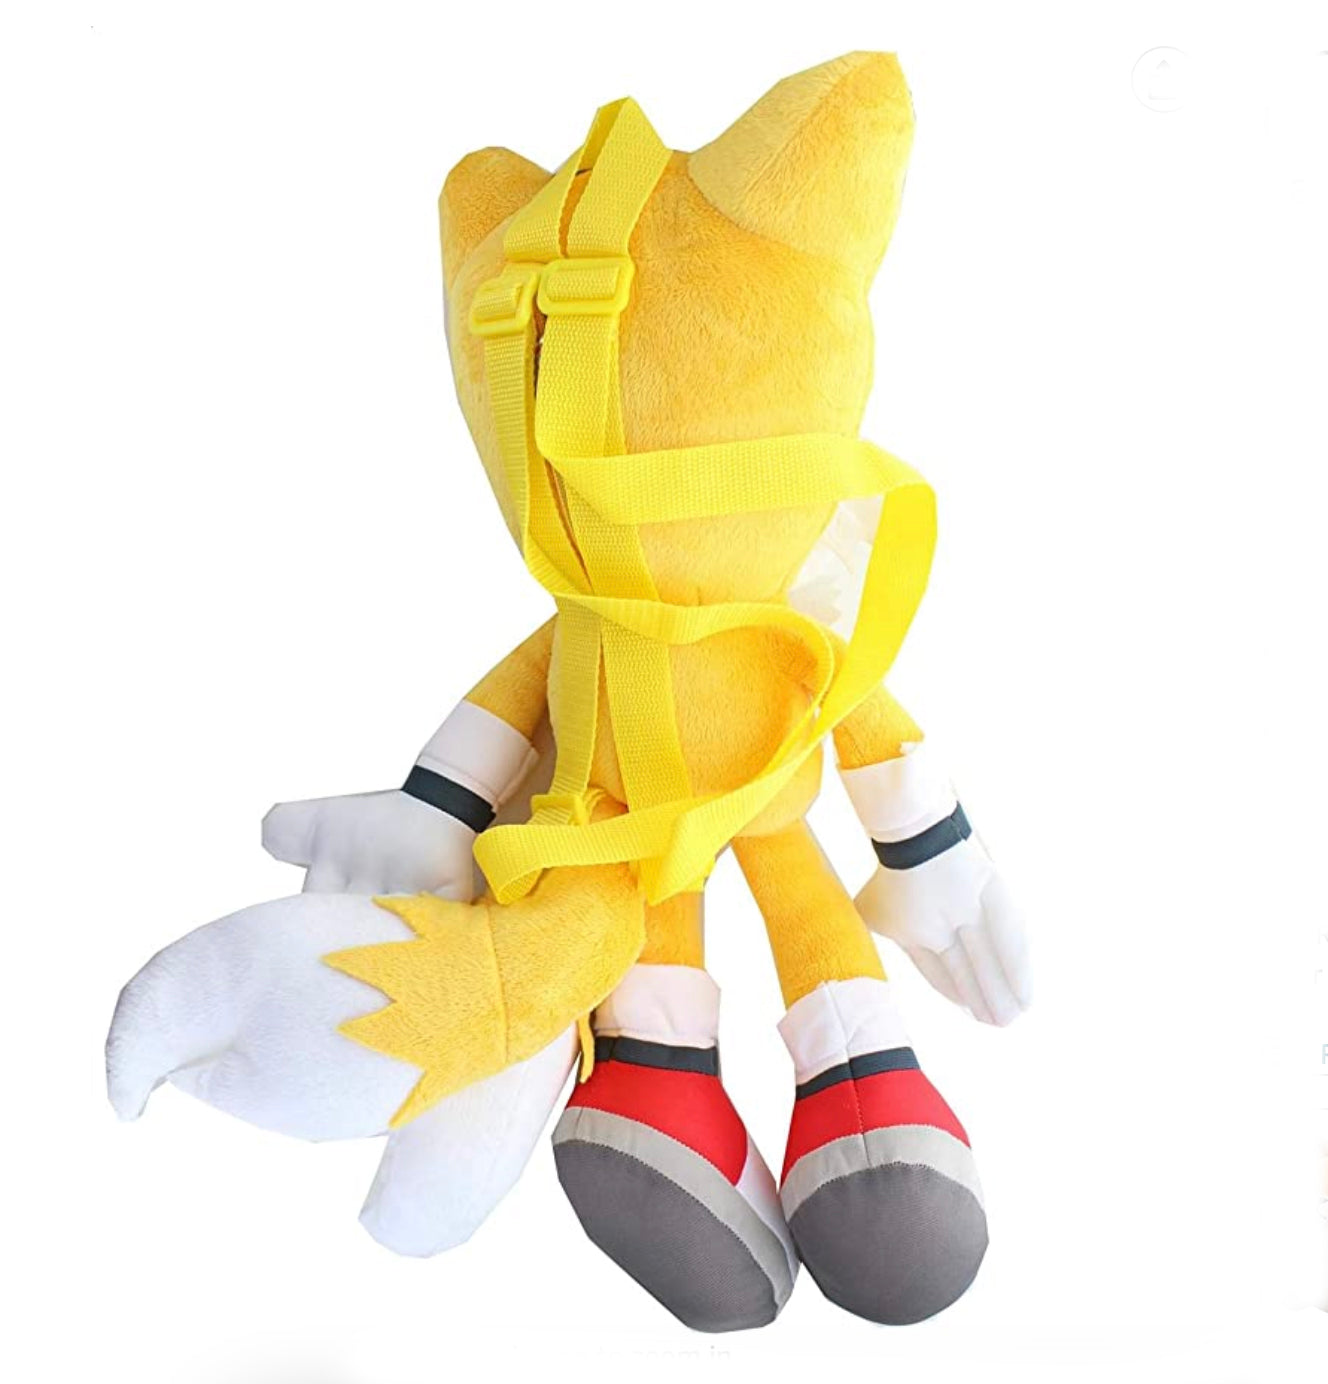 Bag - Sonic - Tails  Plush 18' Backpack